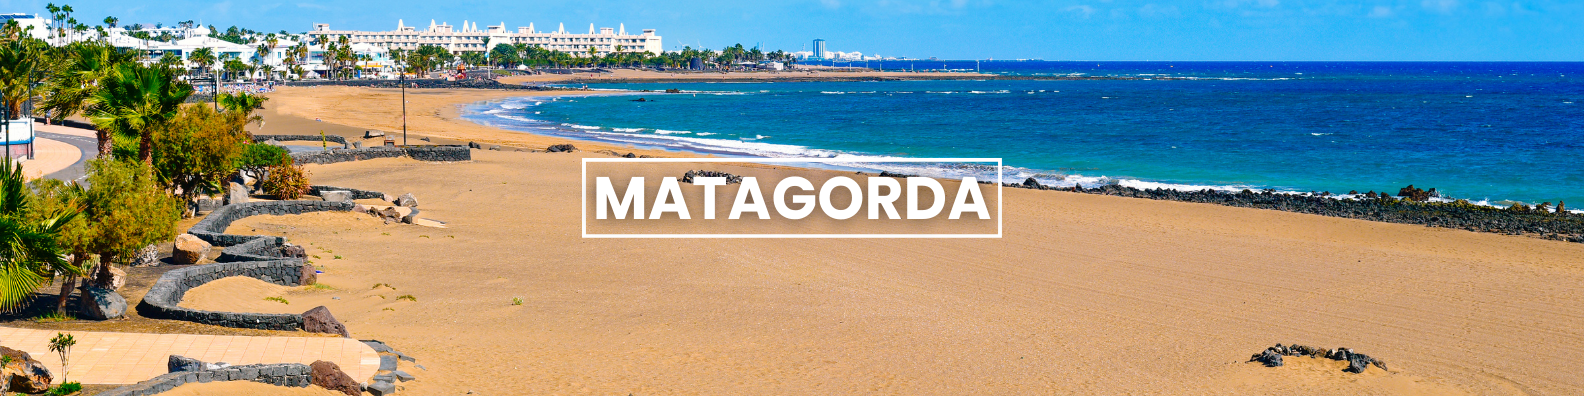 a beach with a sign that says matagorda on it Barter's Travelnet 